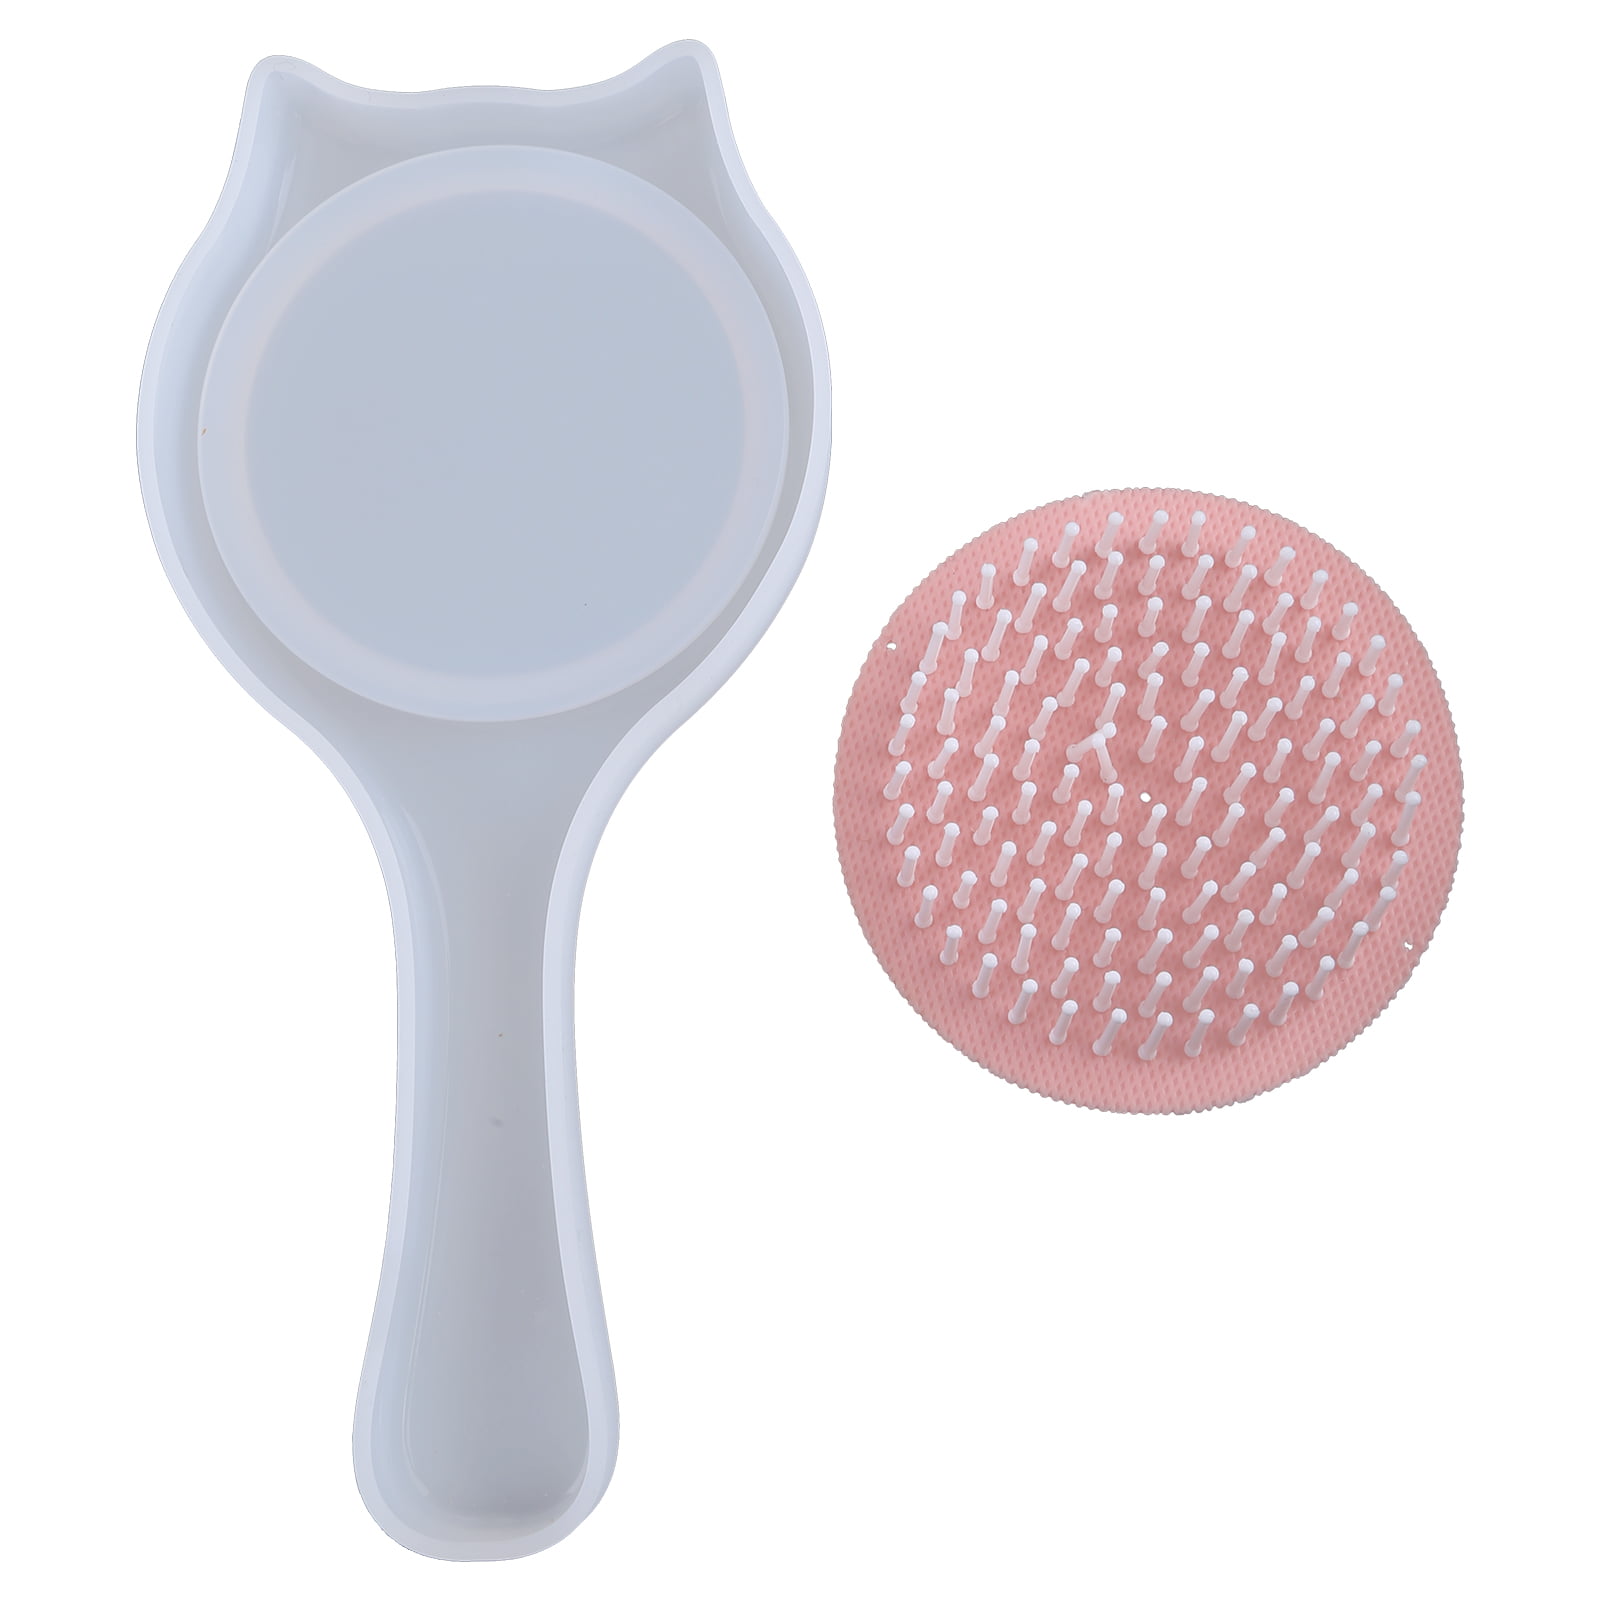 Resin Mold Silicone Brush